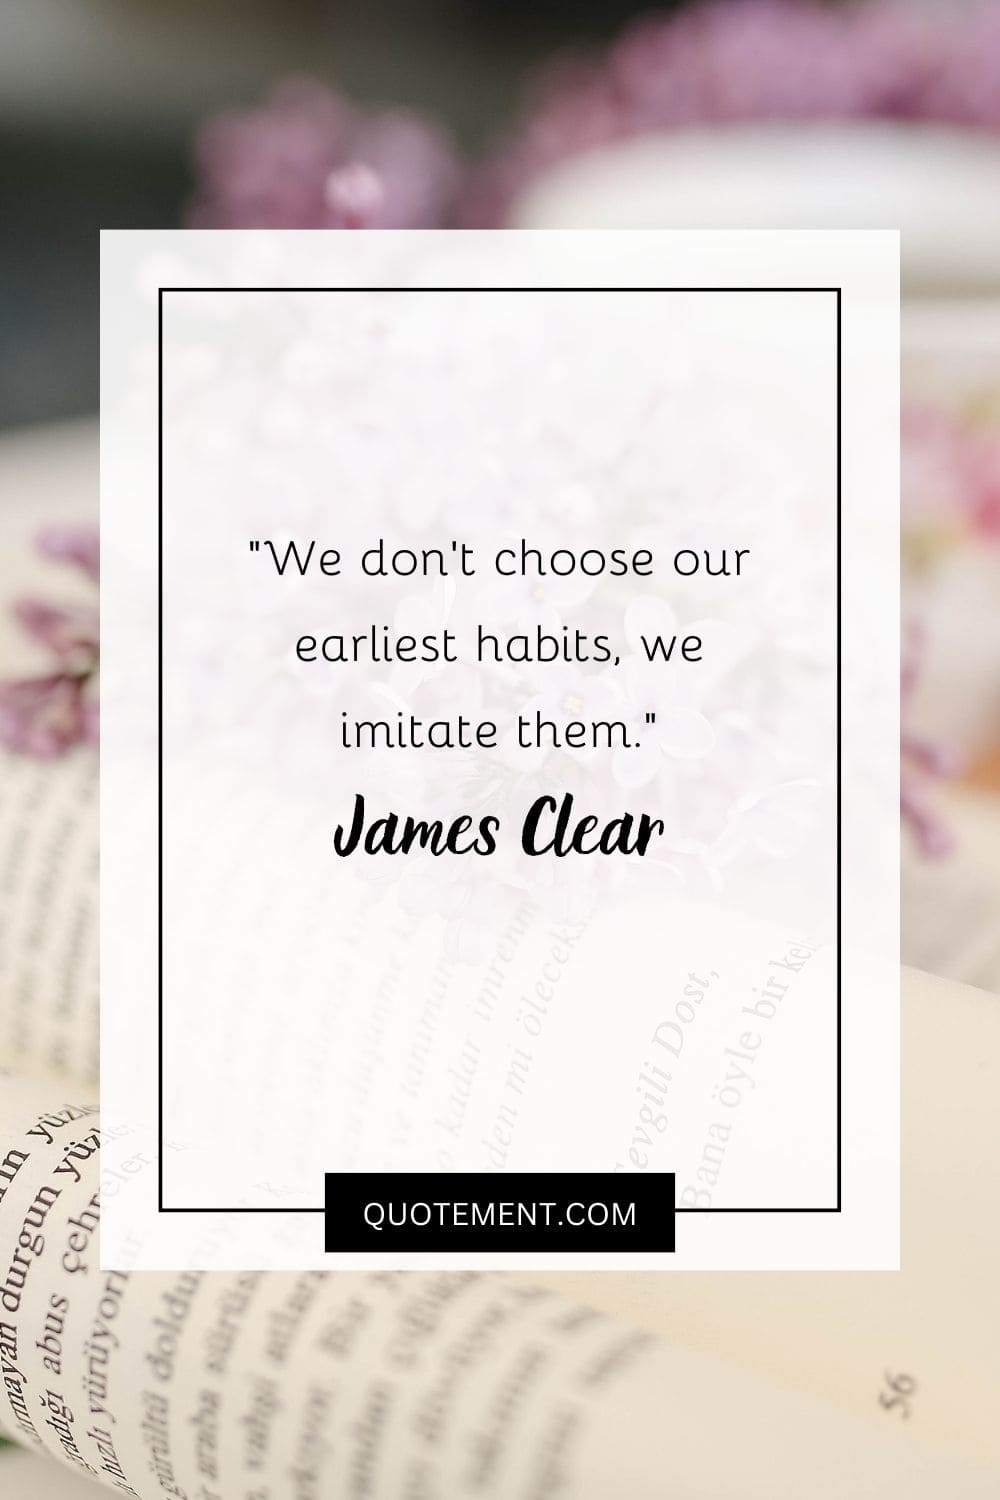 We don’t choose our earliest habits, we imitate them.